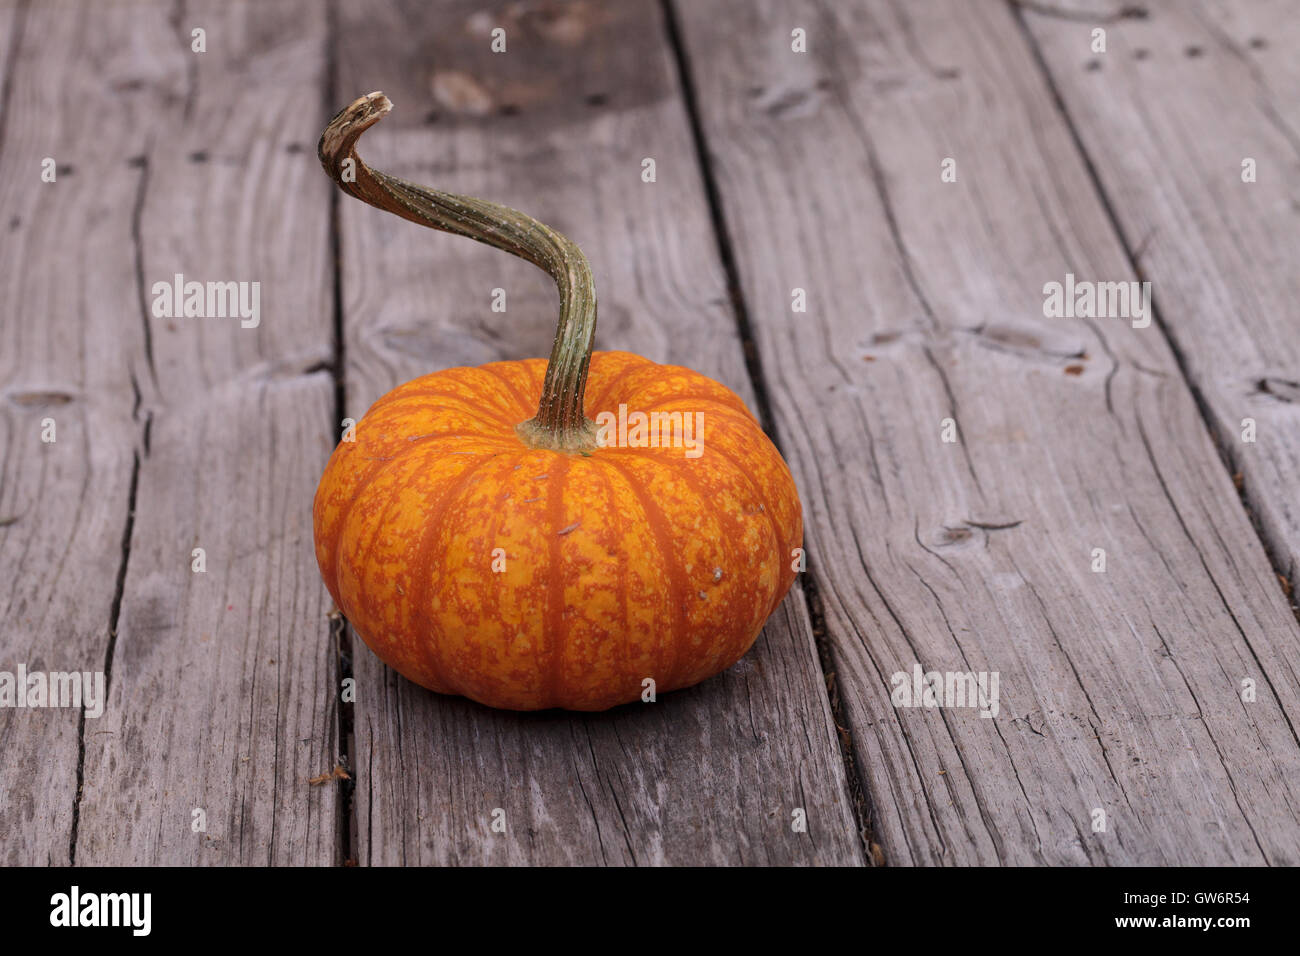 Small Orange pumpkin on a rustic wood picnic table in fall. Stock Photo